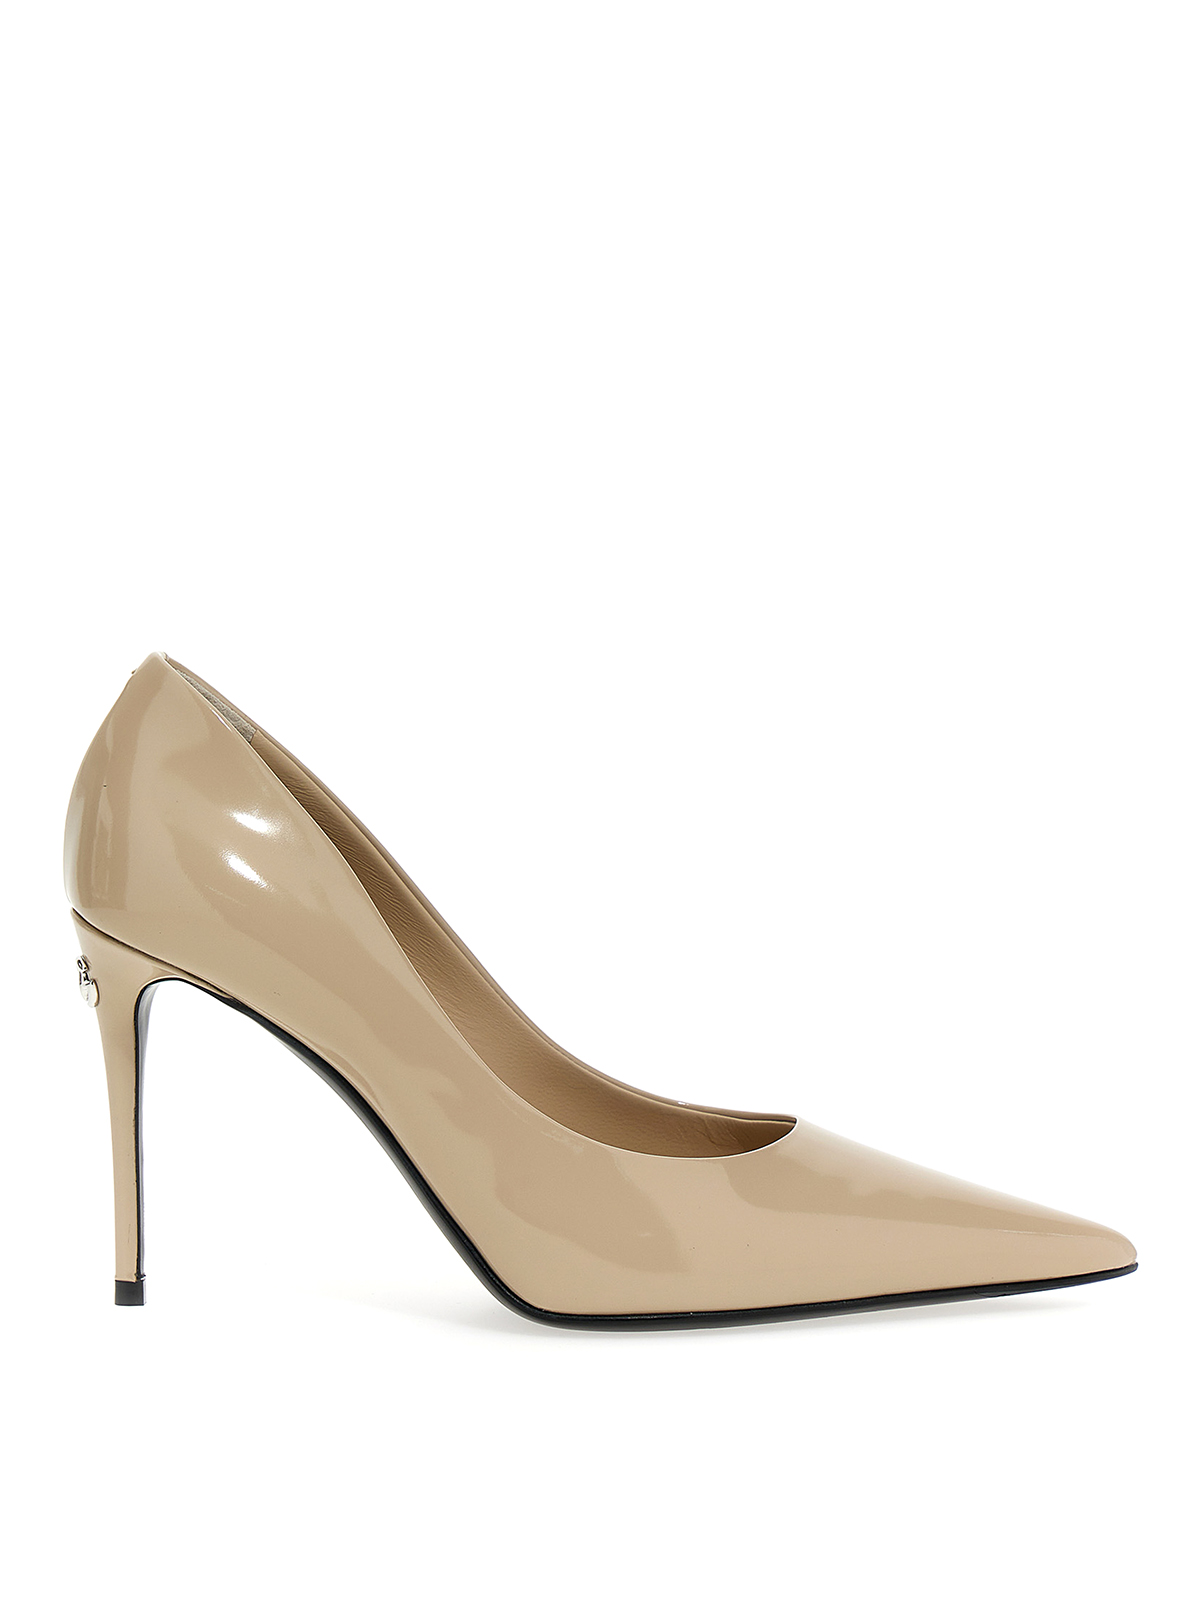 Dolce & Gabbana Logo Pumps In Shiny Calf Leather In Colour Carne Y Neutral